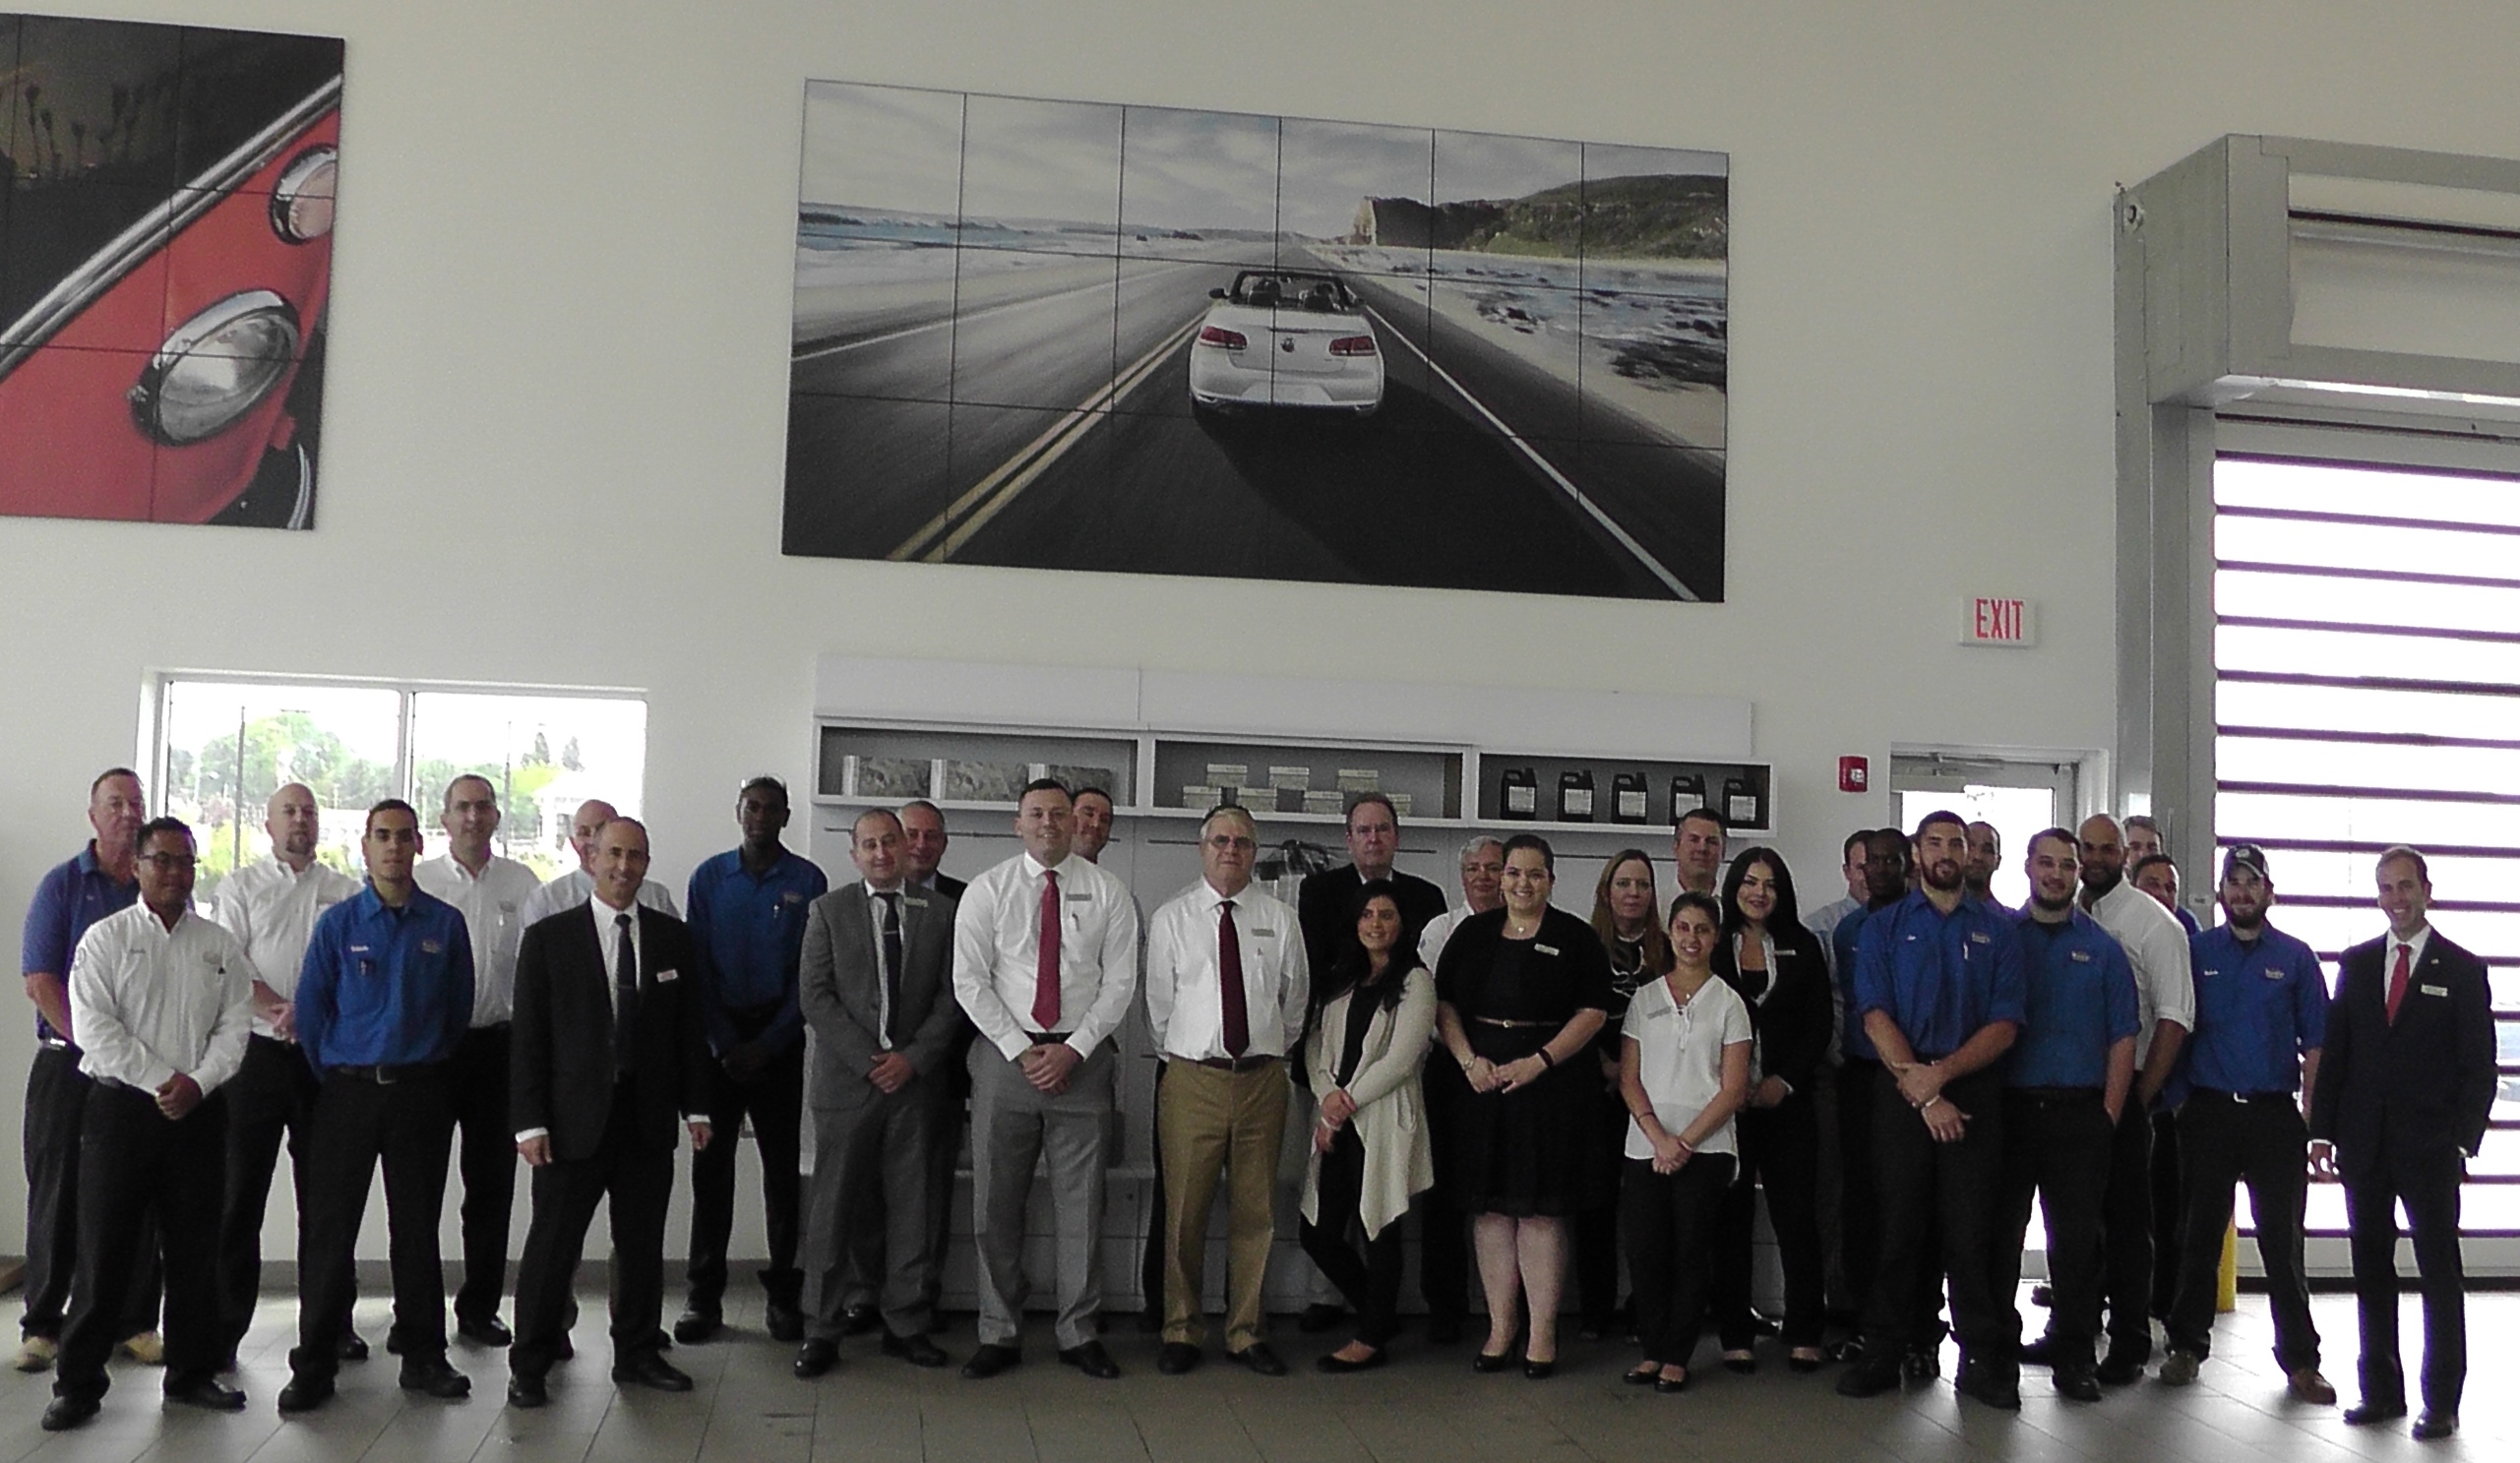 Our team at Kelly Volkswagen is dedicated to your happiness as a VW customer. Whether you're looking for Volkswagen service, parts, a new vehicle, or pre-owned vehicle, our entire staff is at your disposal. Please let us know what we can do for you at Kelly Volkswagen.